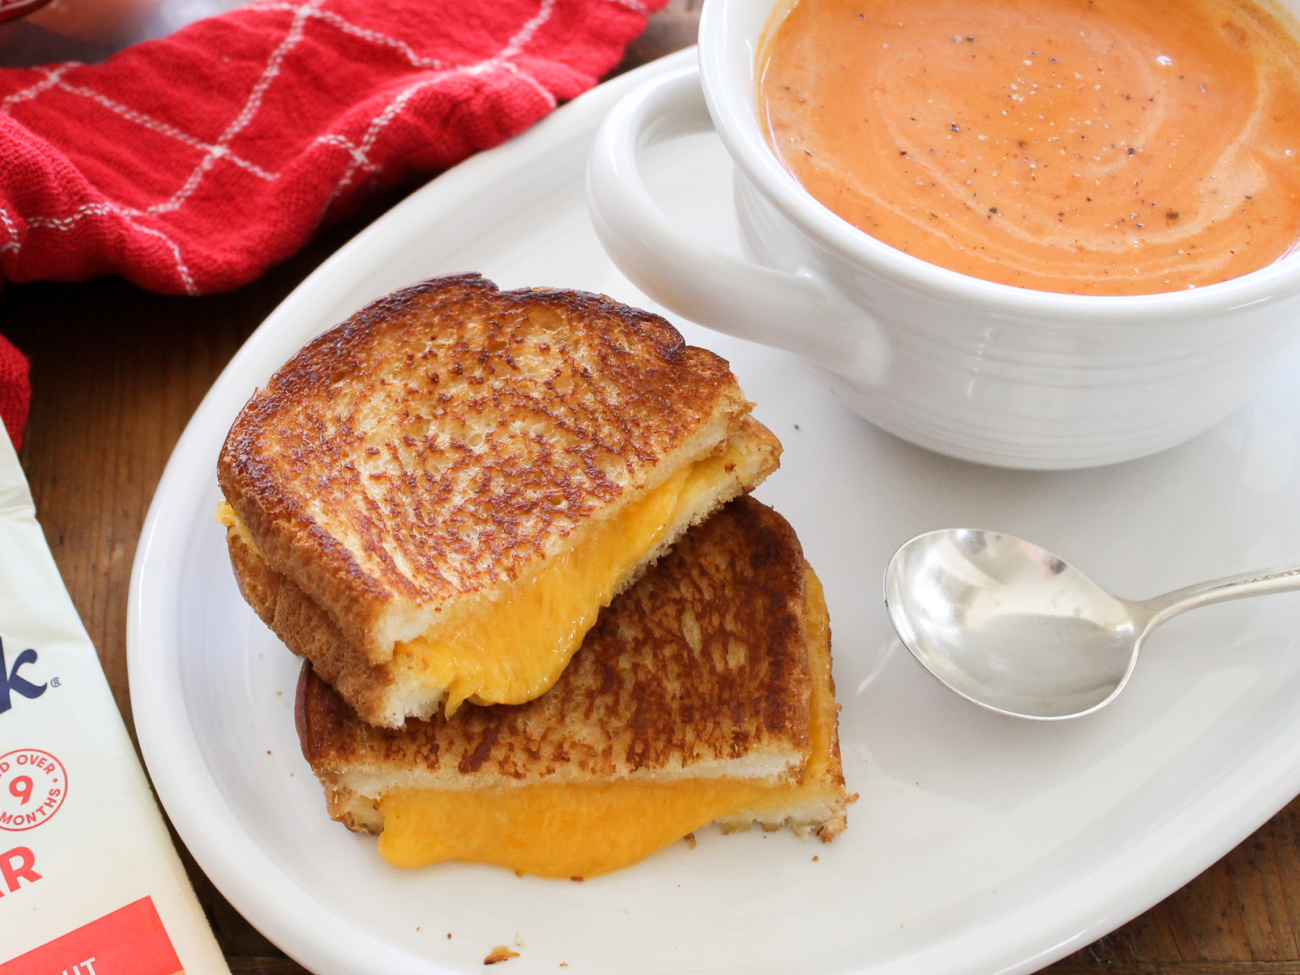 Serve Up A Delicious Grilled Cheese Sandwich With Big Savings On Tillamook Cheese At Publix on I Heart Publix 1